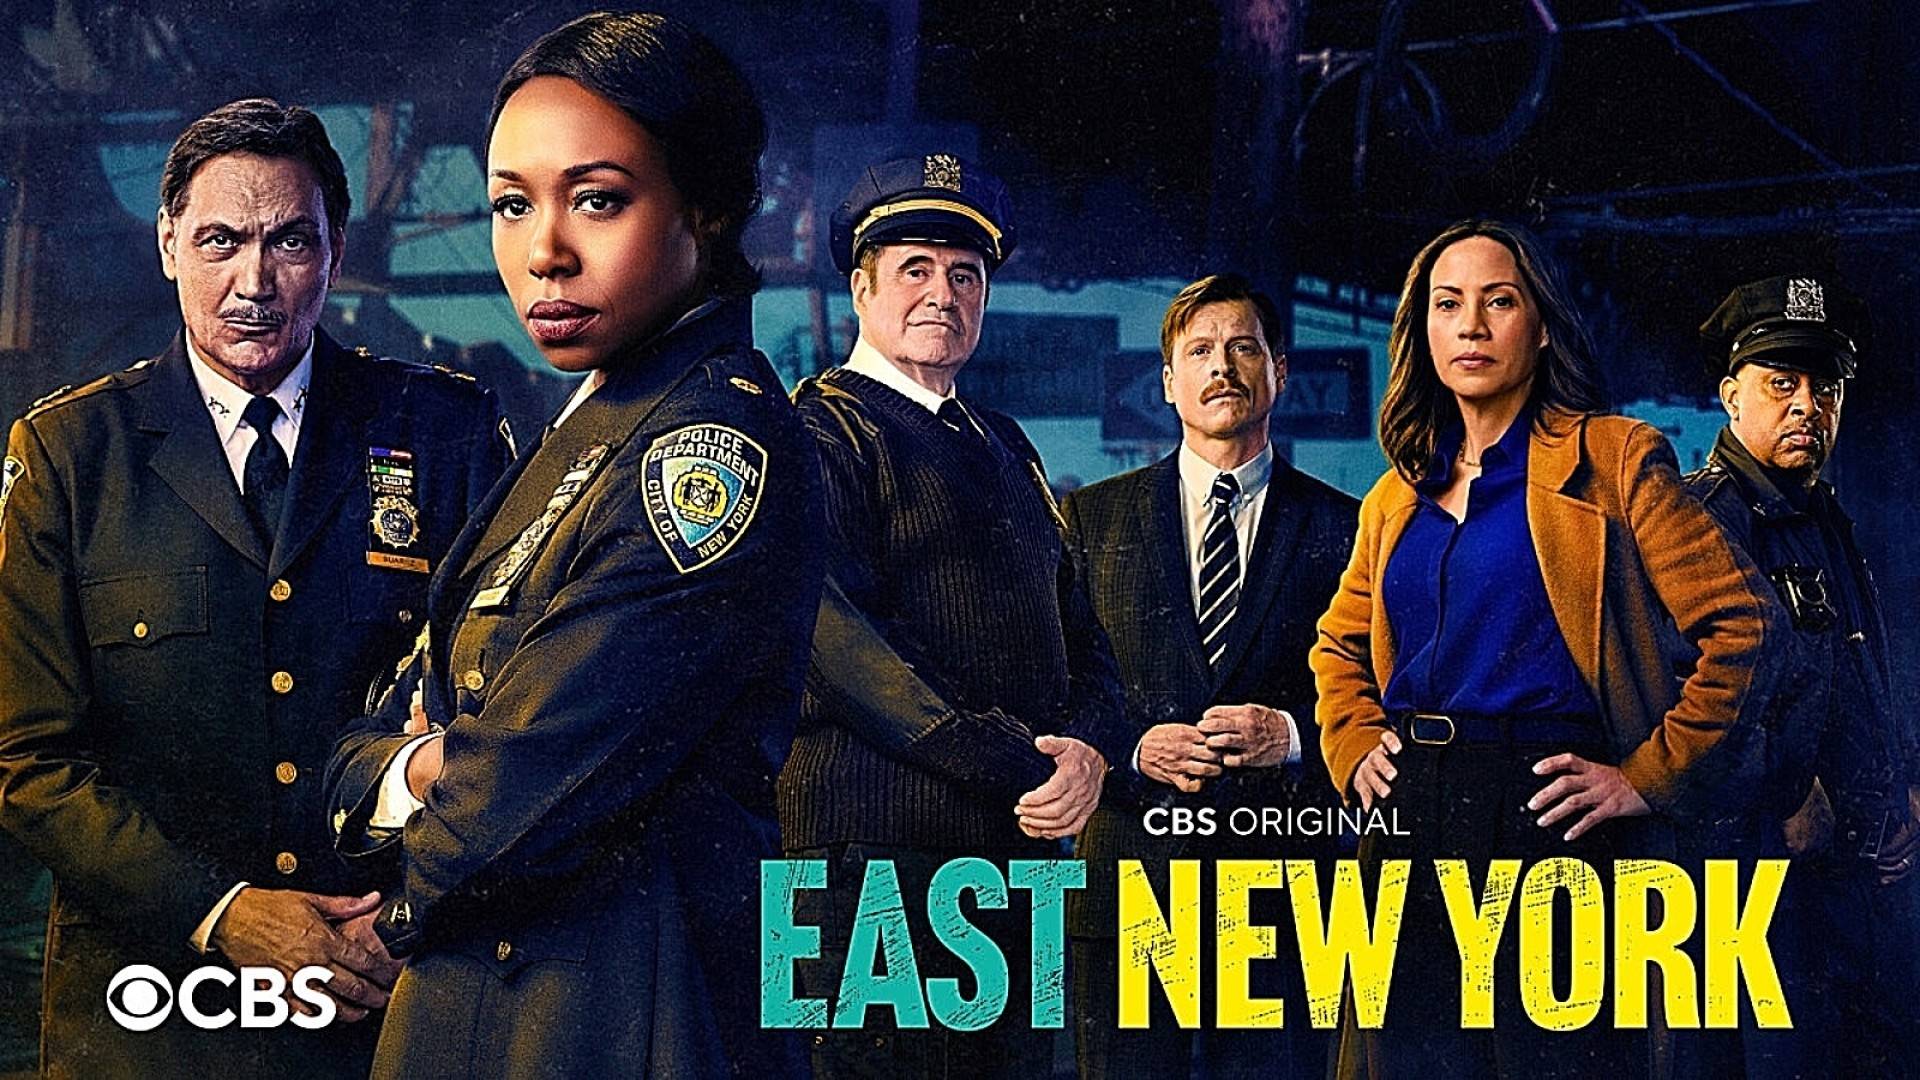 "East New York" airs Sundays at 9:00-10:00 PM, ET/PT on the CBS Television Network, and available to stream live and on demand on Paramount+